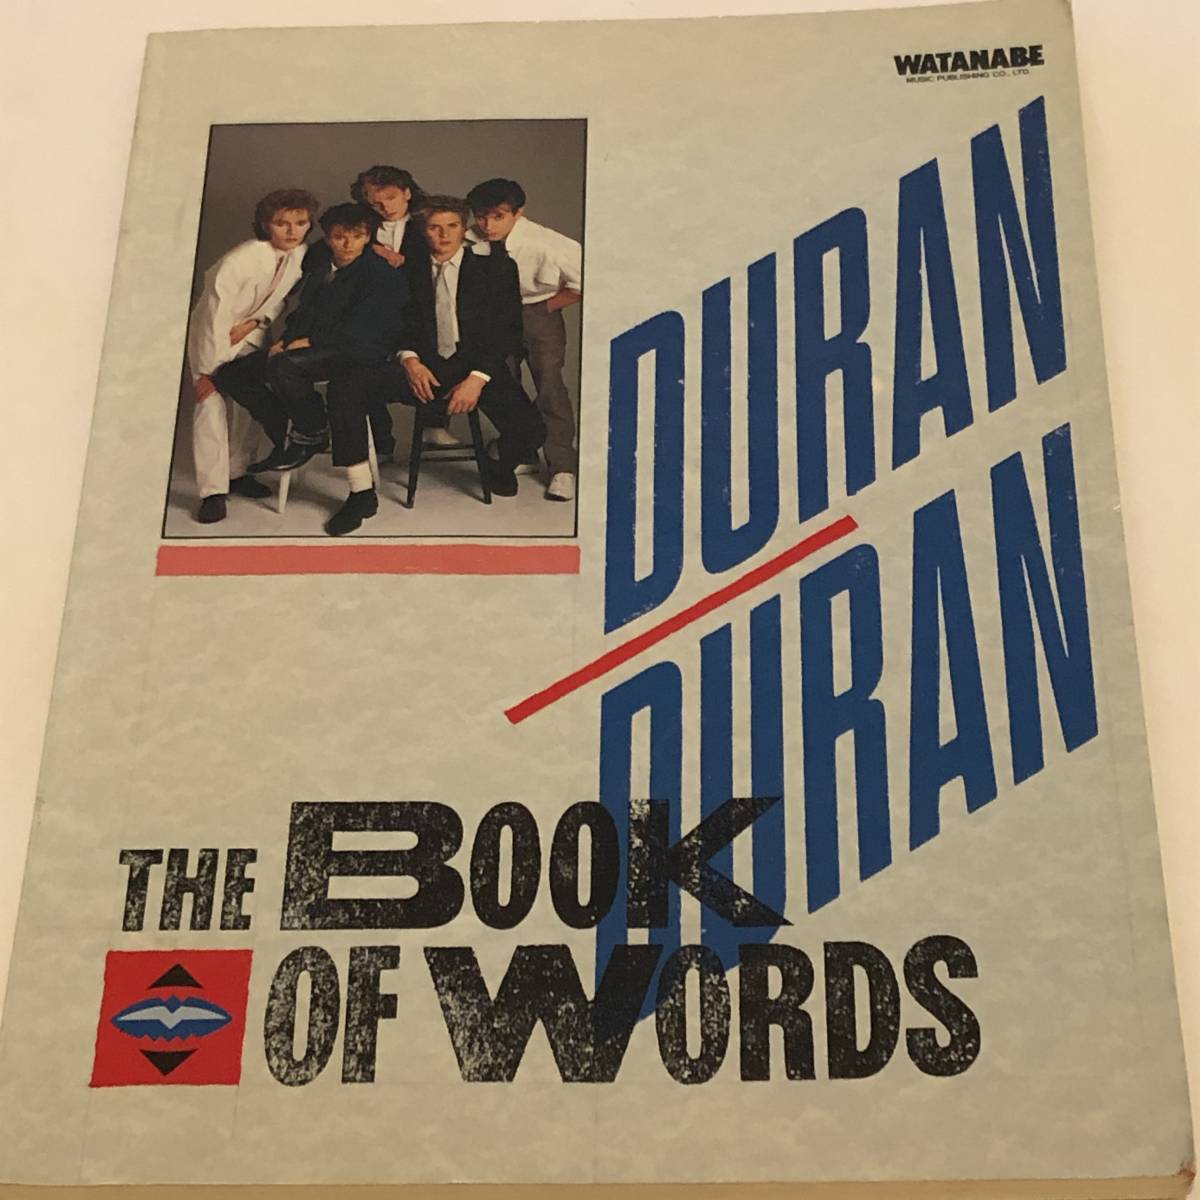 DURAN DURAN THE BOOK of WORDSte. Ran *te. Ran ../ -stroke - Lee / photograph ( considerably the first period. not yet departure table photograph . contains ) 1986 year the first version book